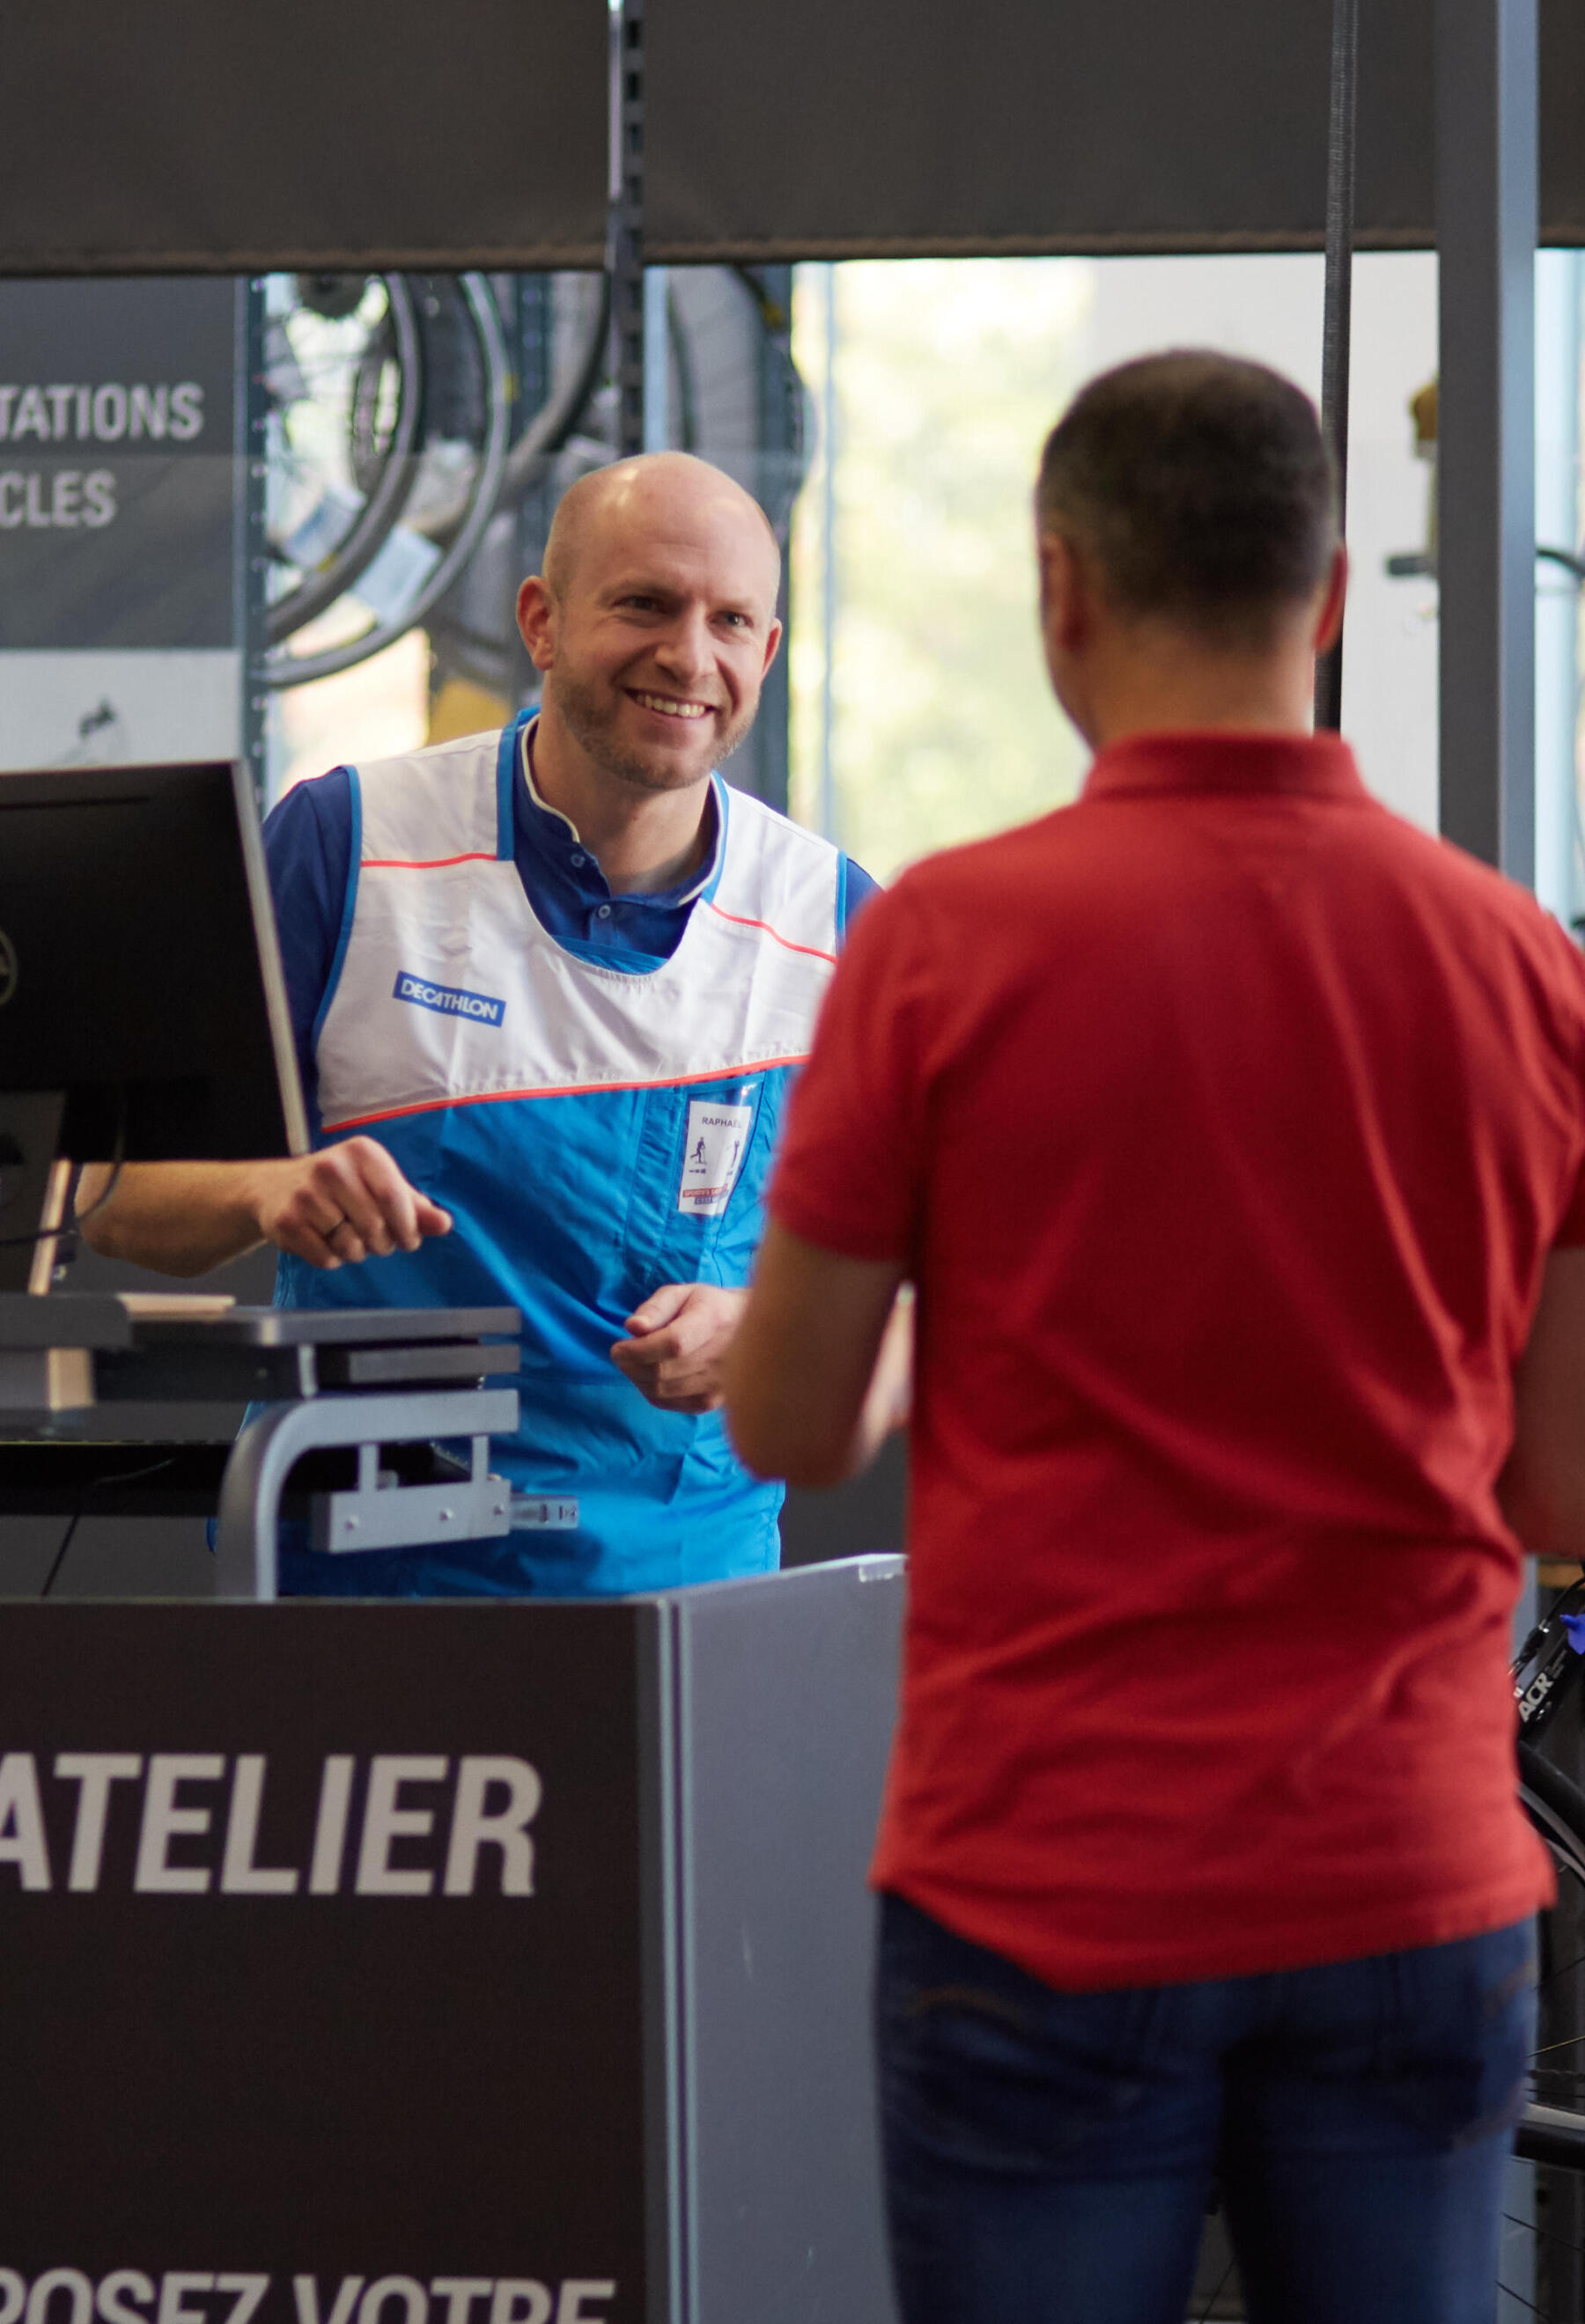 10 questions you may have about DECATHLON's sustainable development